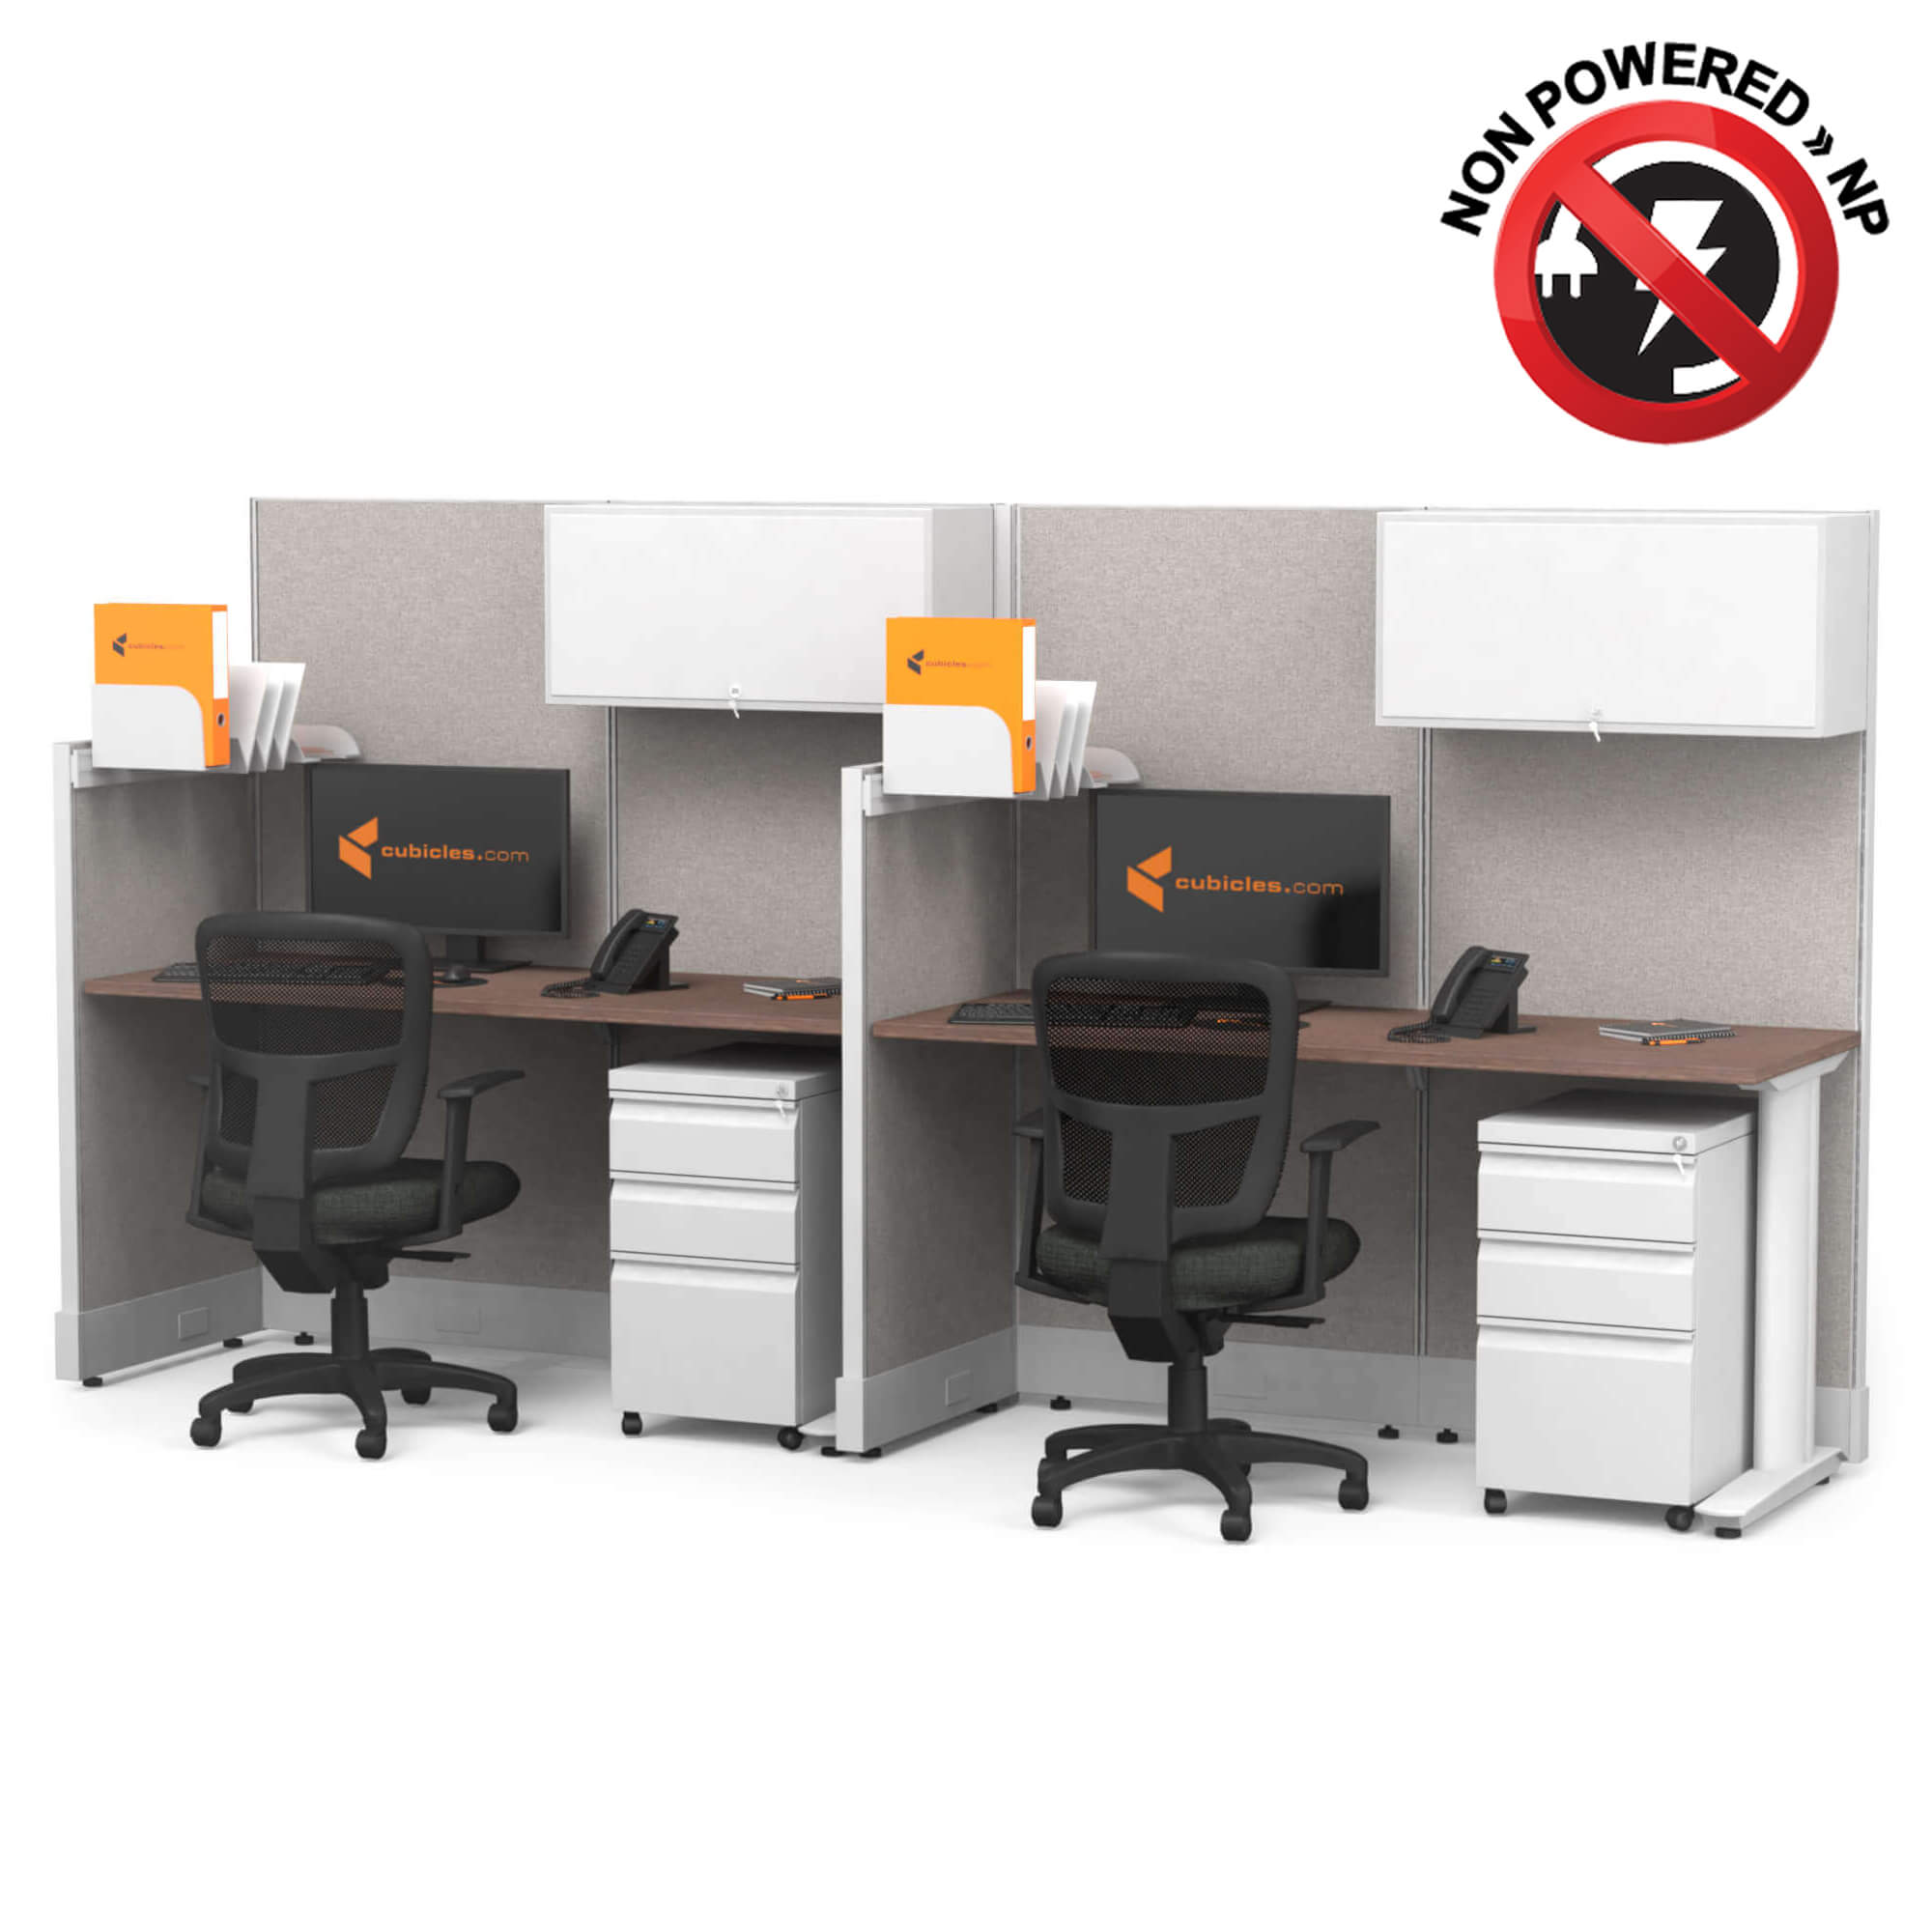 cubicle-desk-straight-with-storage-2pack-non-powered.jpg